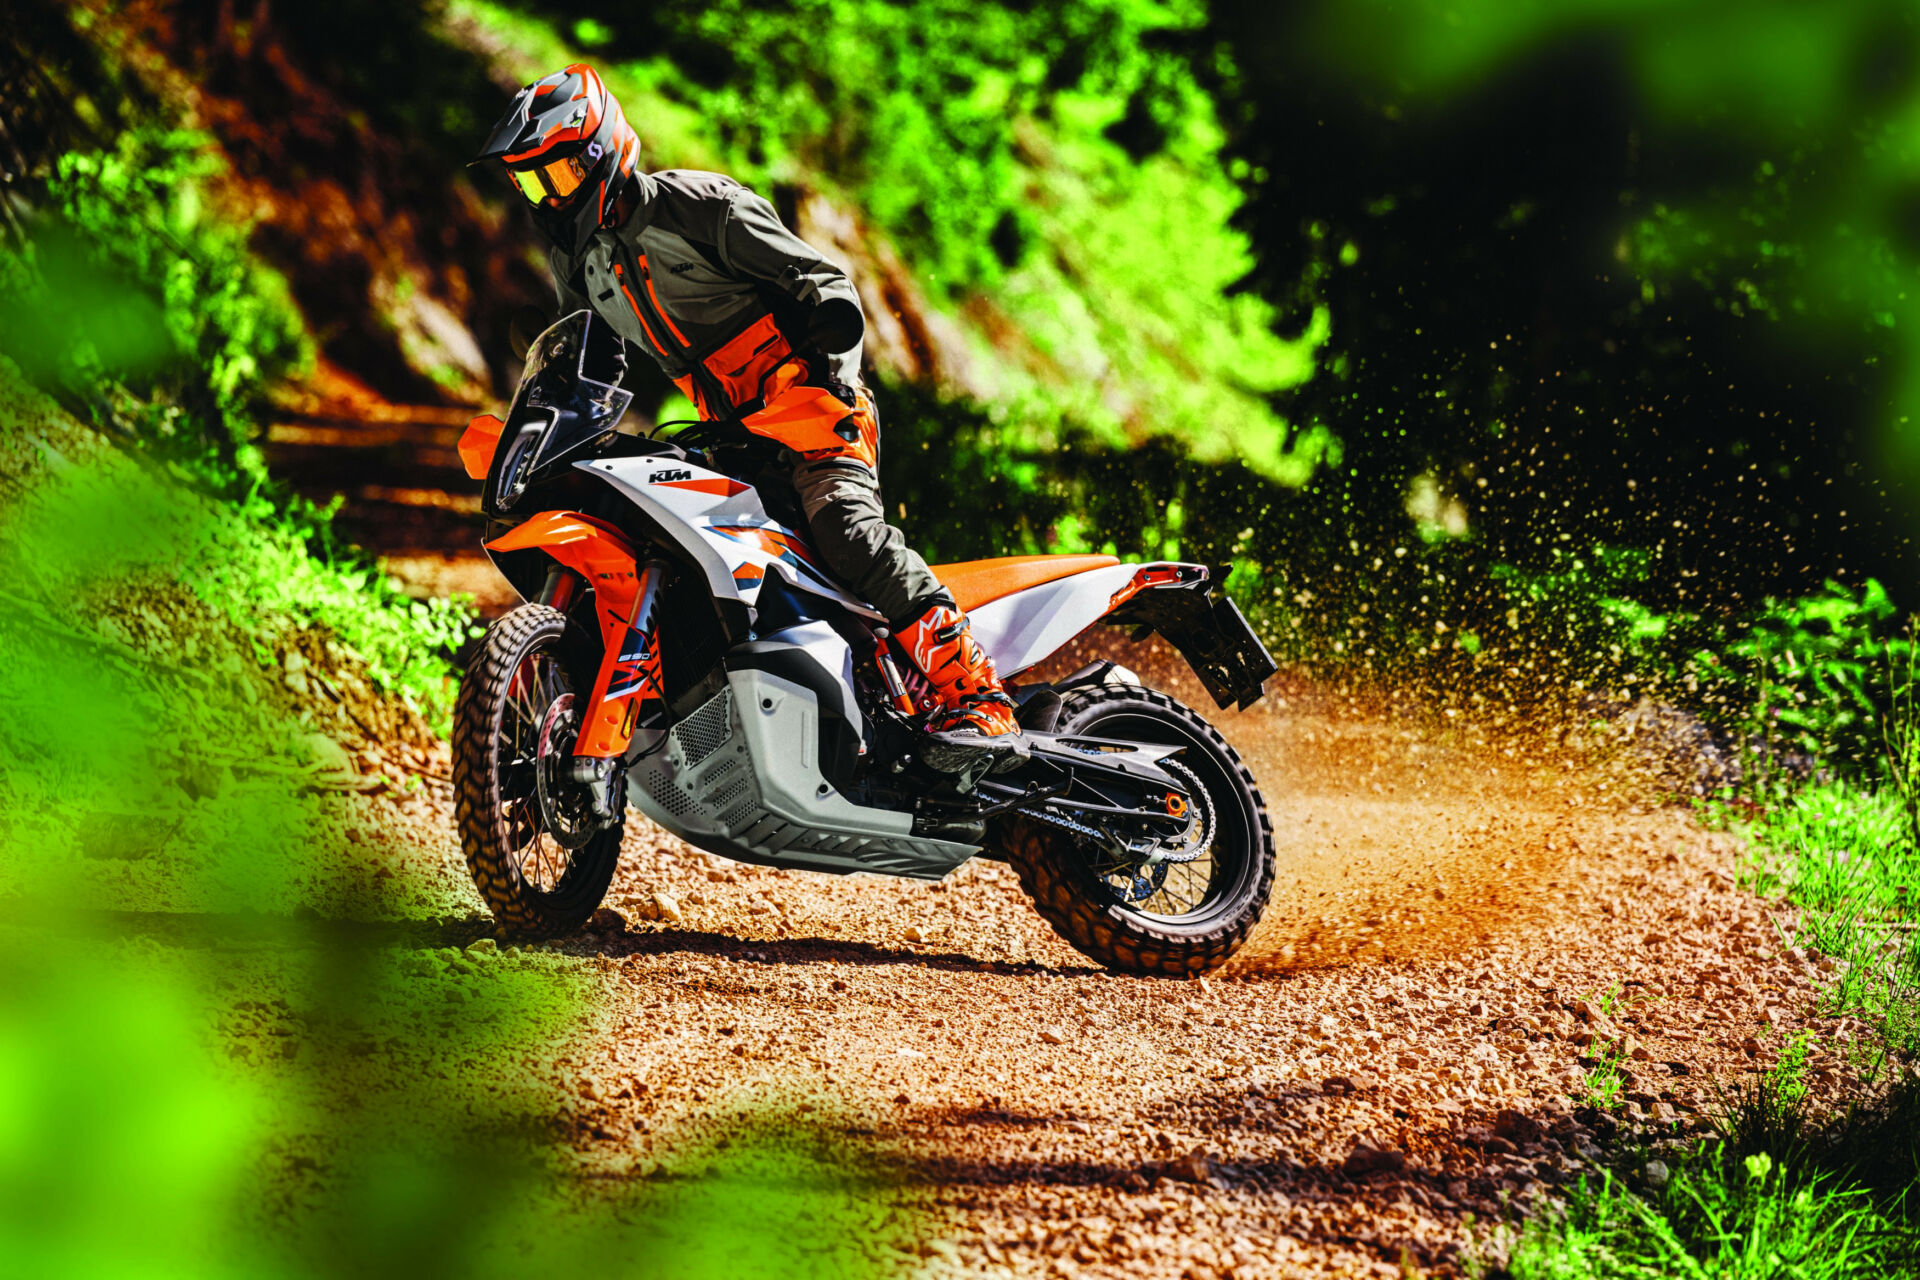 An upgraded 2023 KTM 890 Adventure R in action. Photo courtesy KTM.